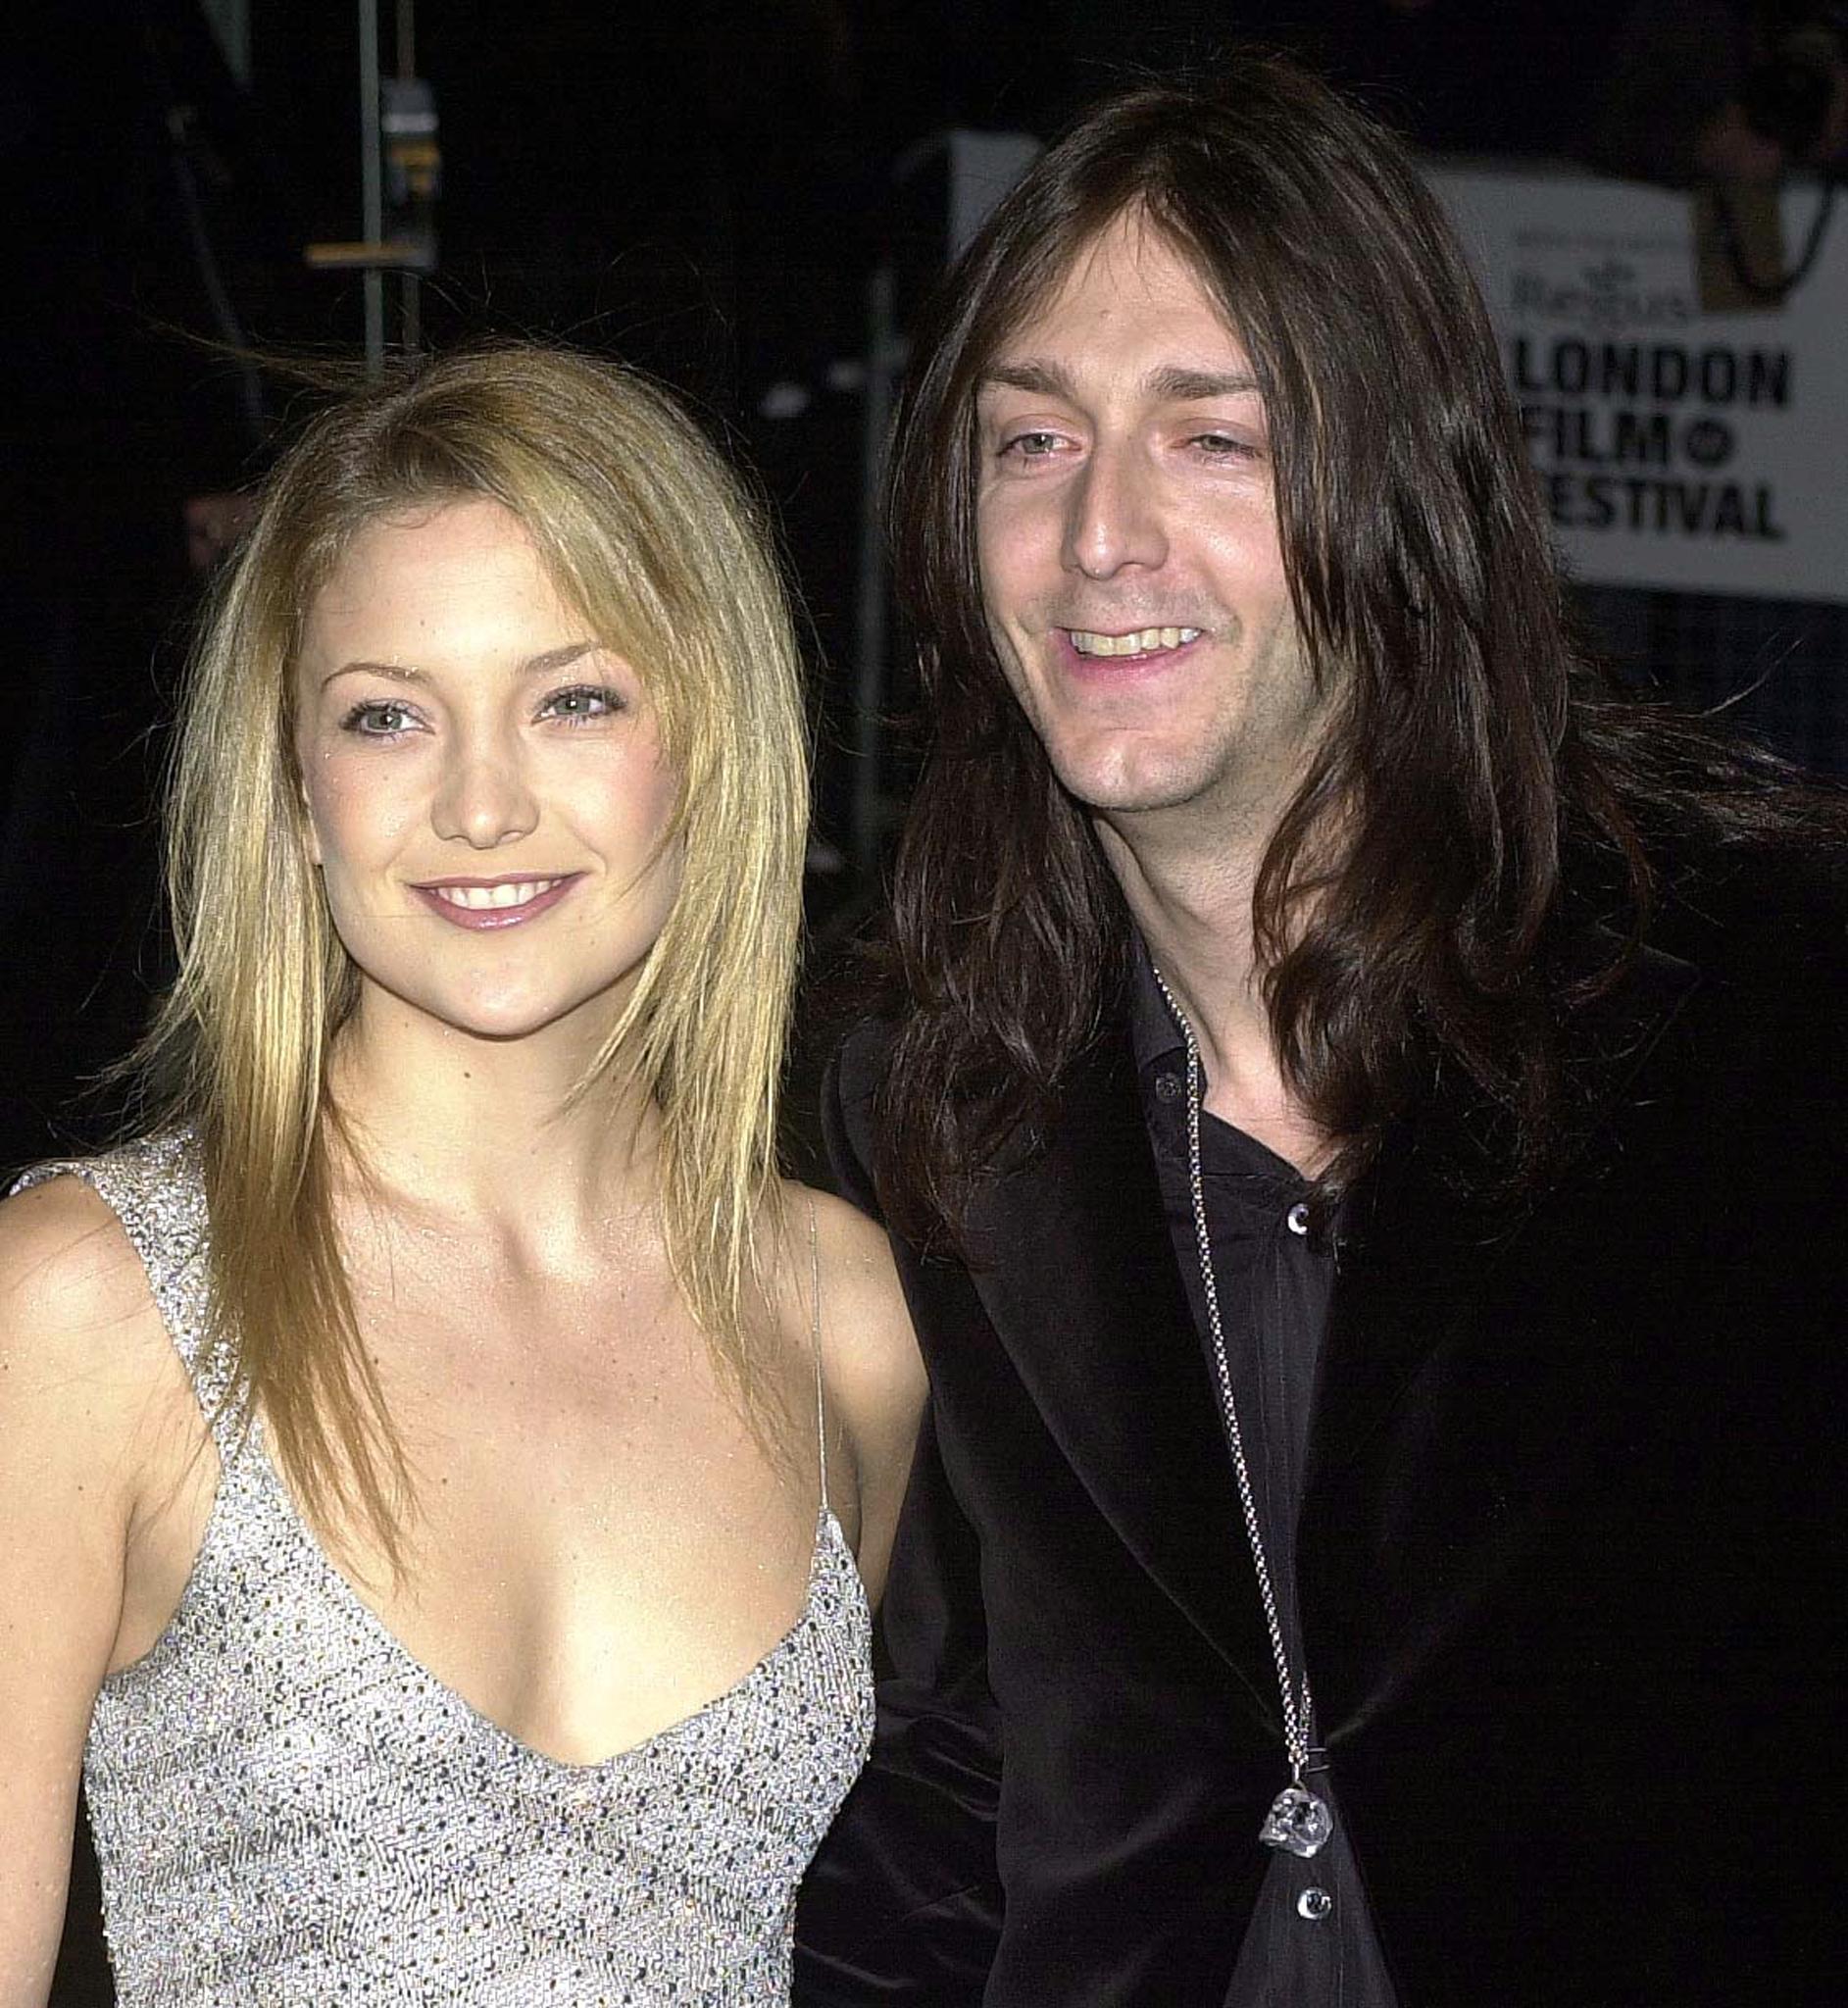 Movie star Kate Hudson, and boyfriend Chris Robinson arrive at the premiere of her new film "Almost Famous" at the Odeon Cinema in London 01 November 2000. | Source: Getty Images